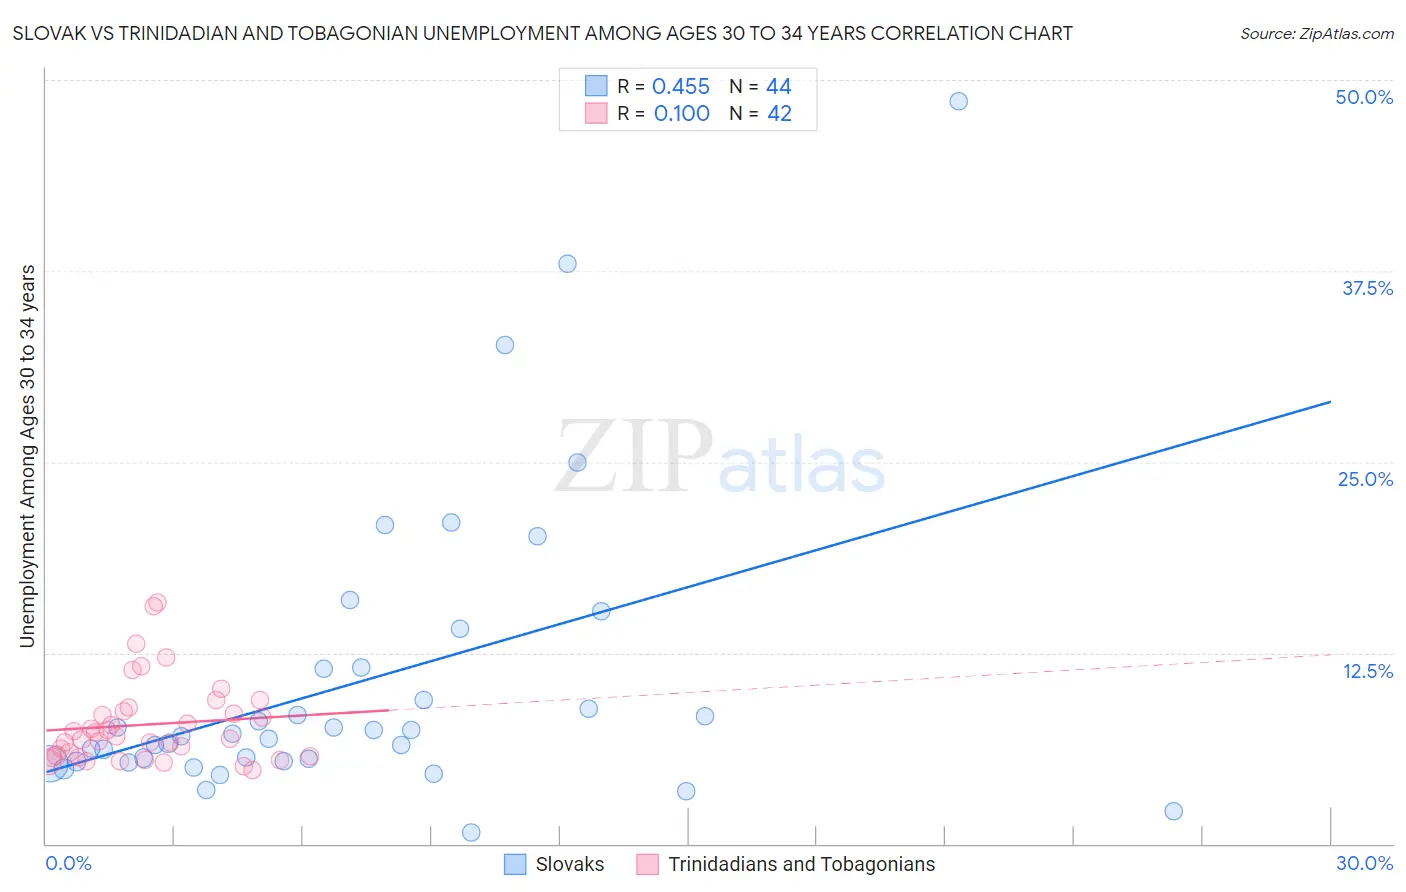 Slovak vs Trinidadian and Tobagonian Unemployment Among Ages 30 to 34 years